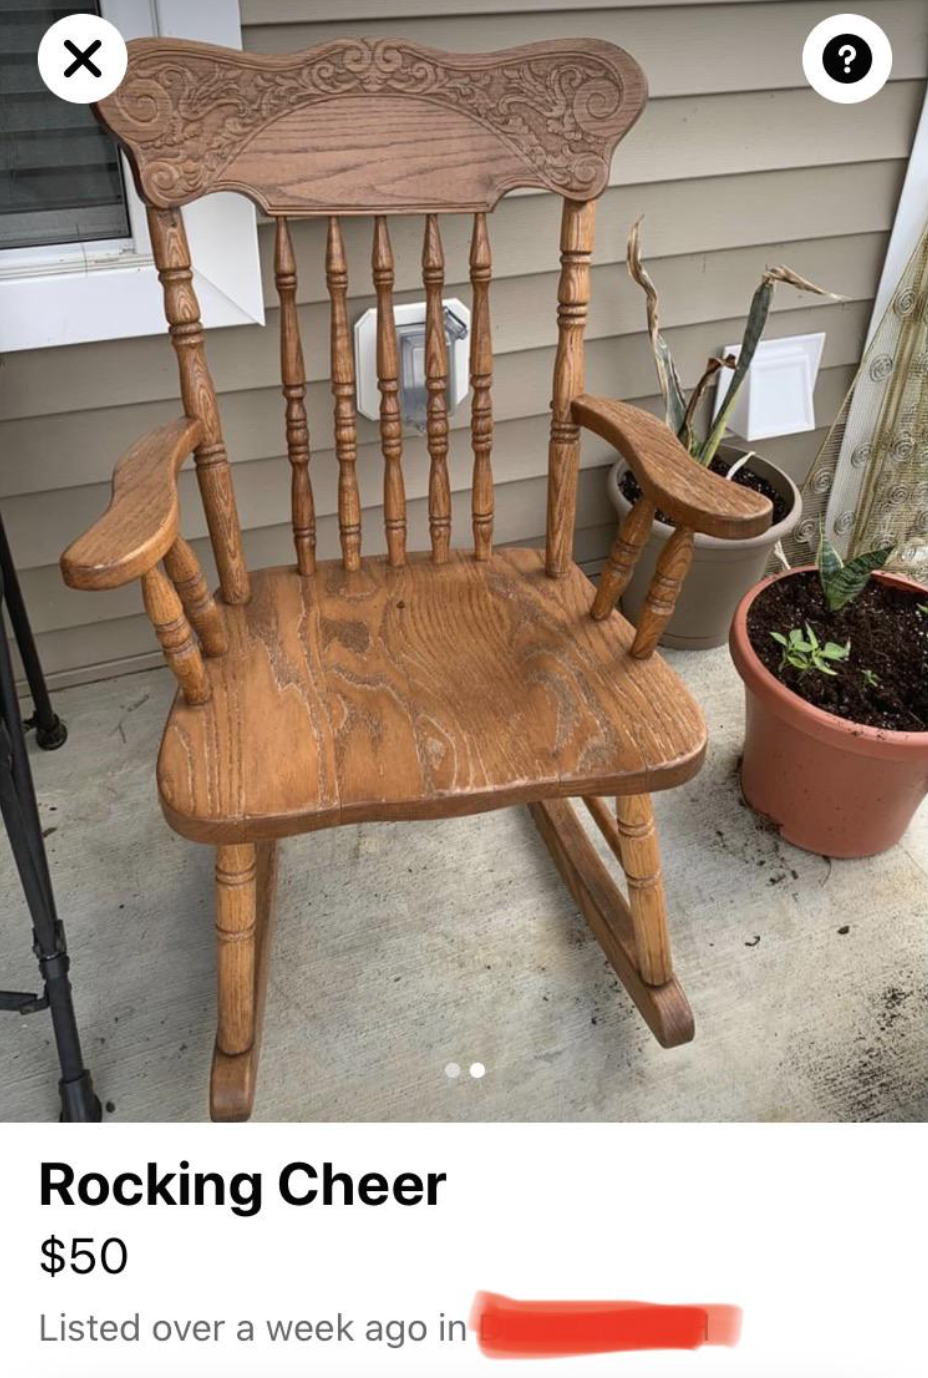 chair for sale reading rocking cheer